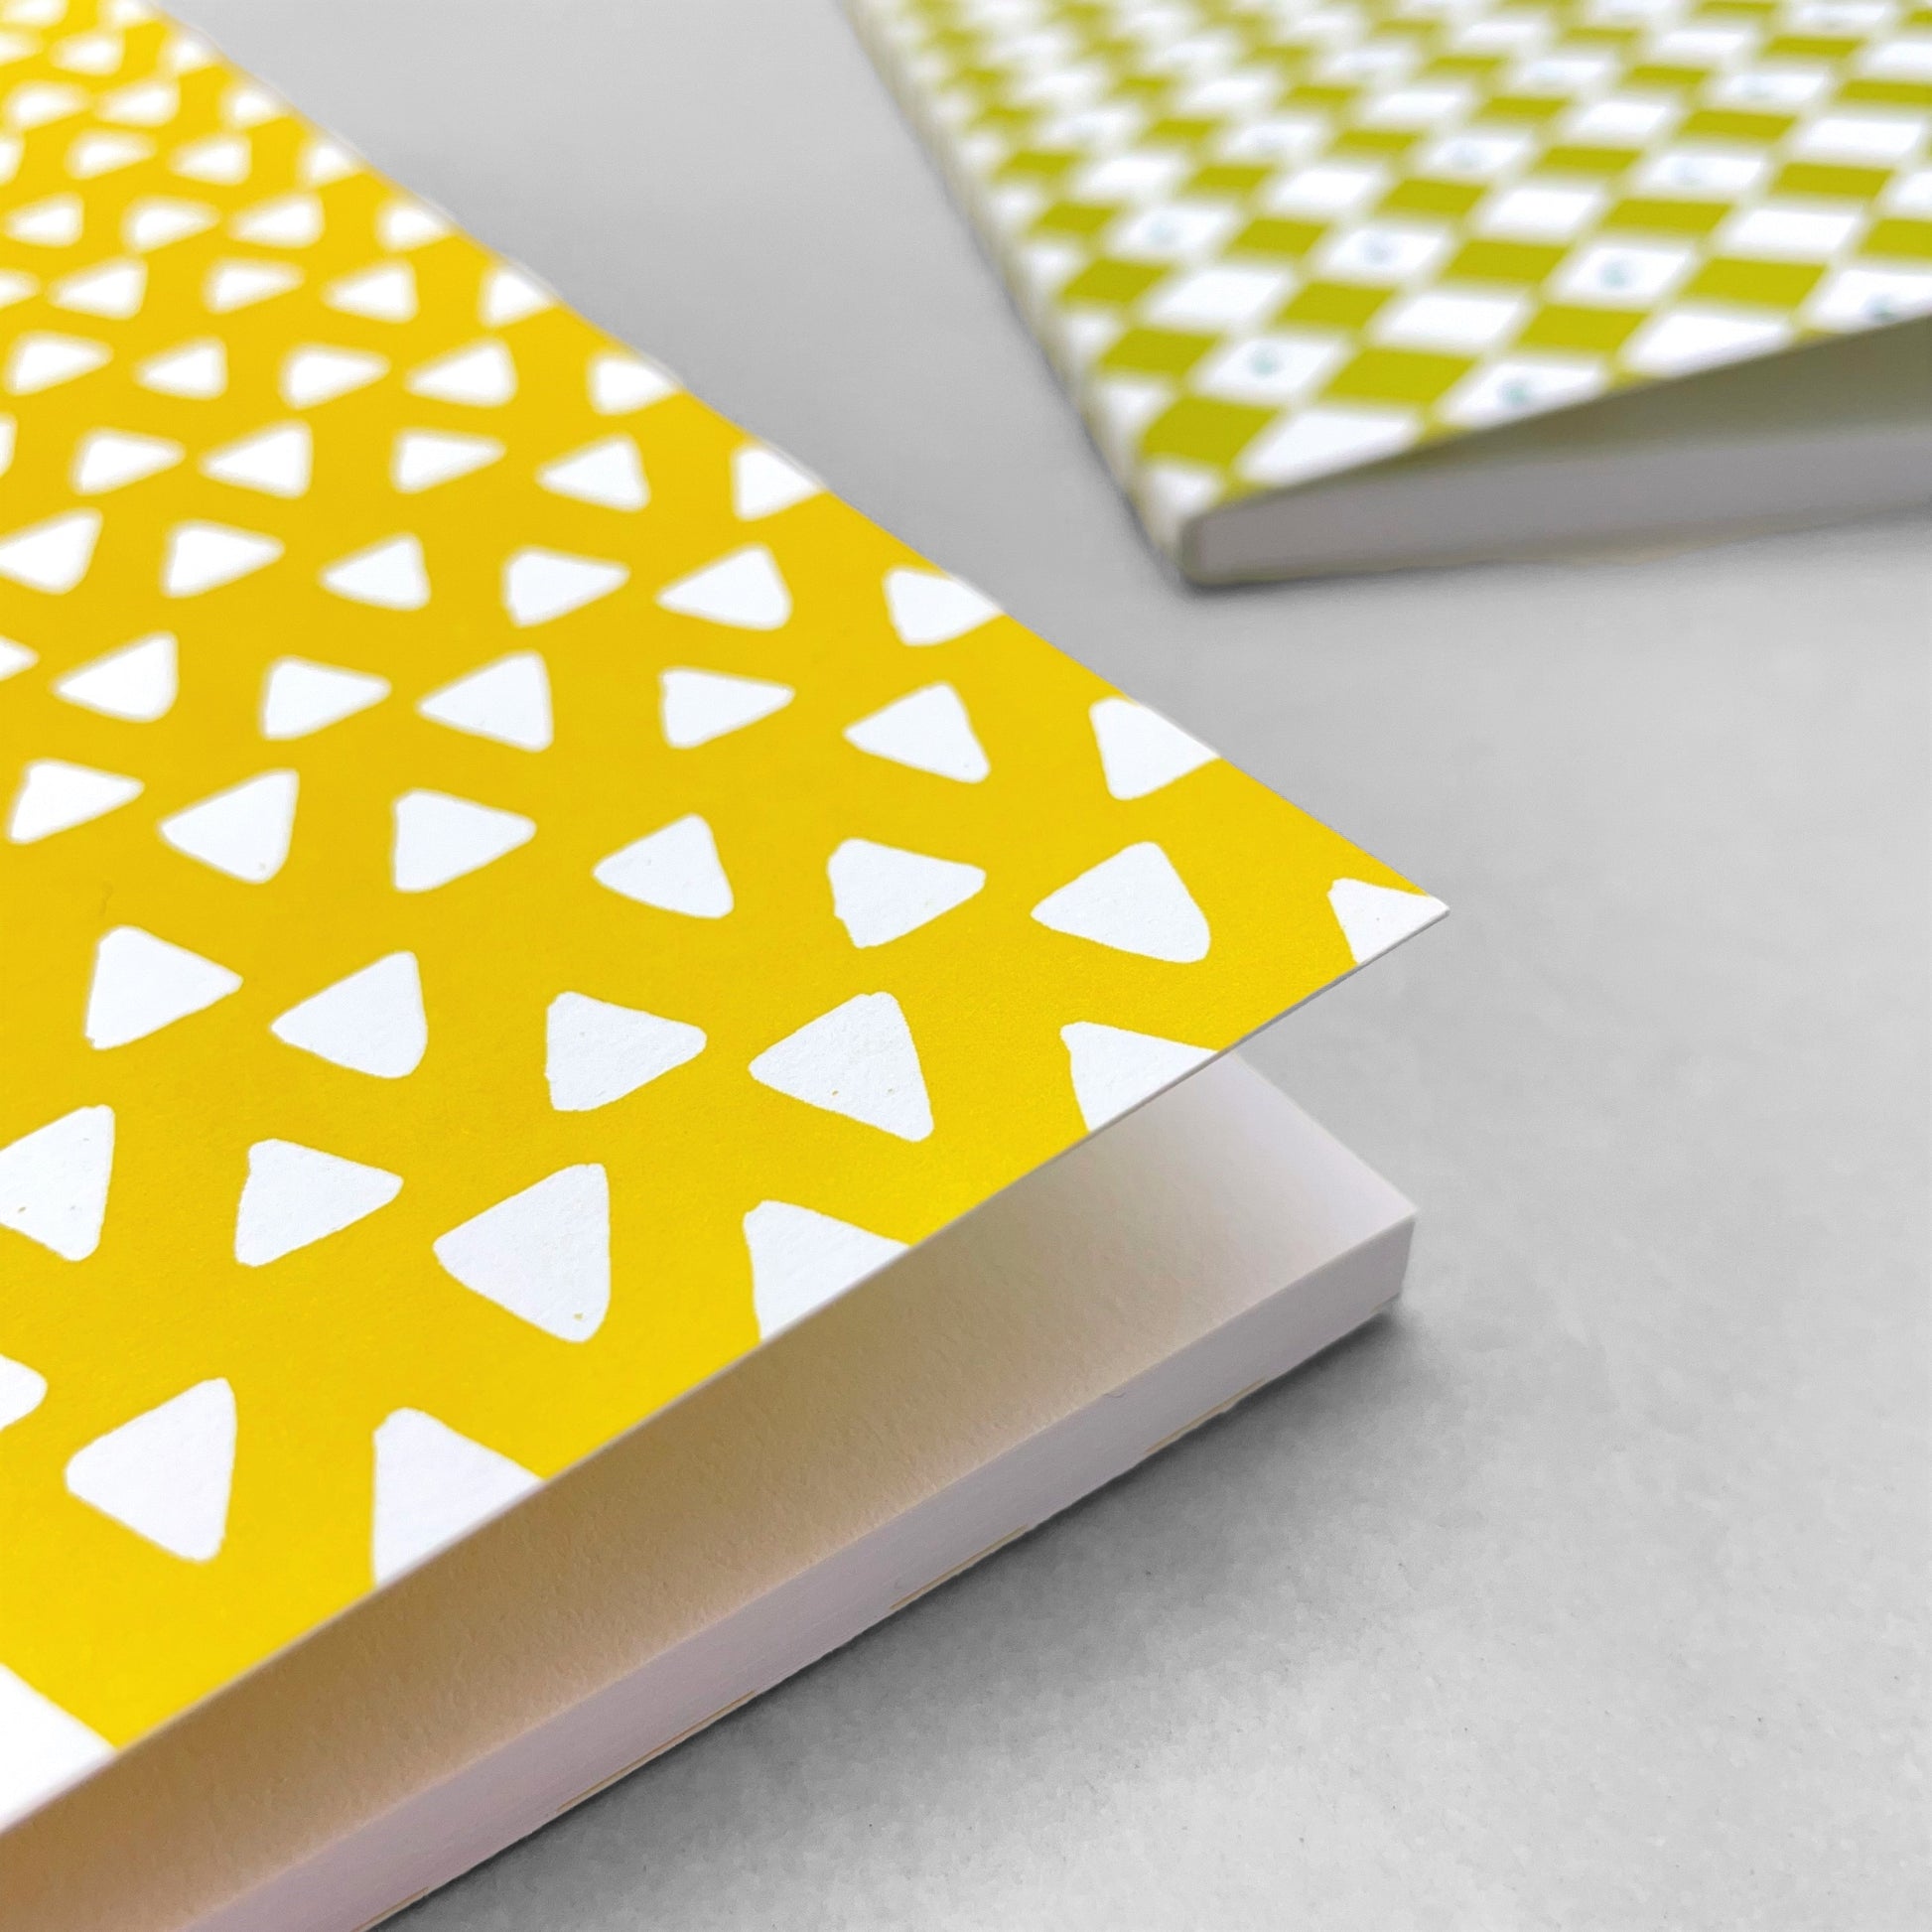 A5 notebook with bright yellow cover and repeat pattern of white triangles by Heather Evelyn